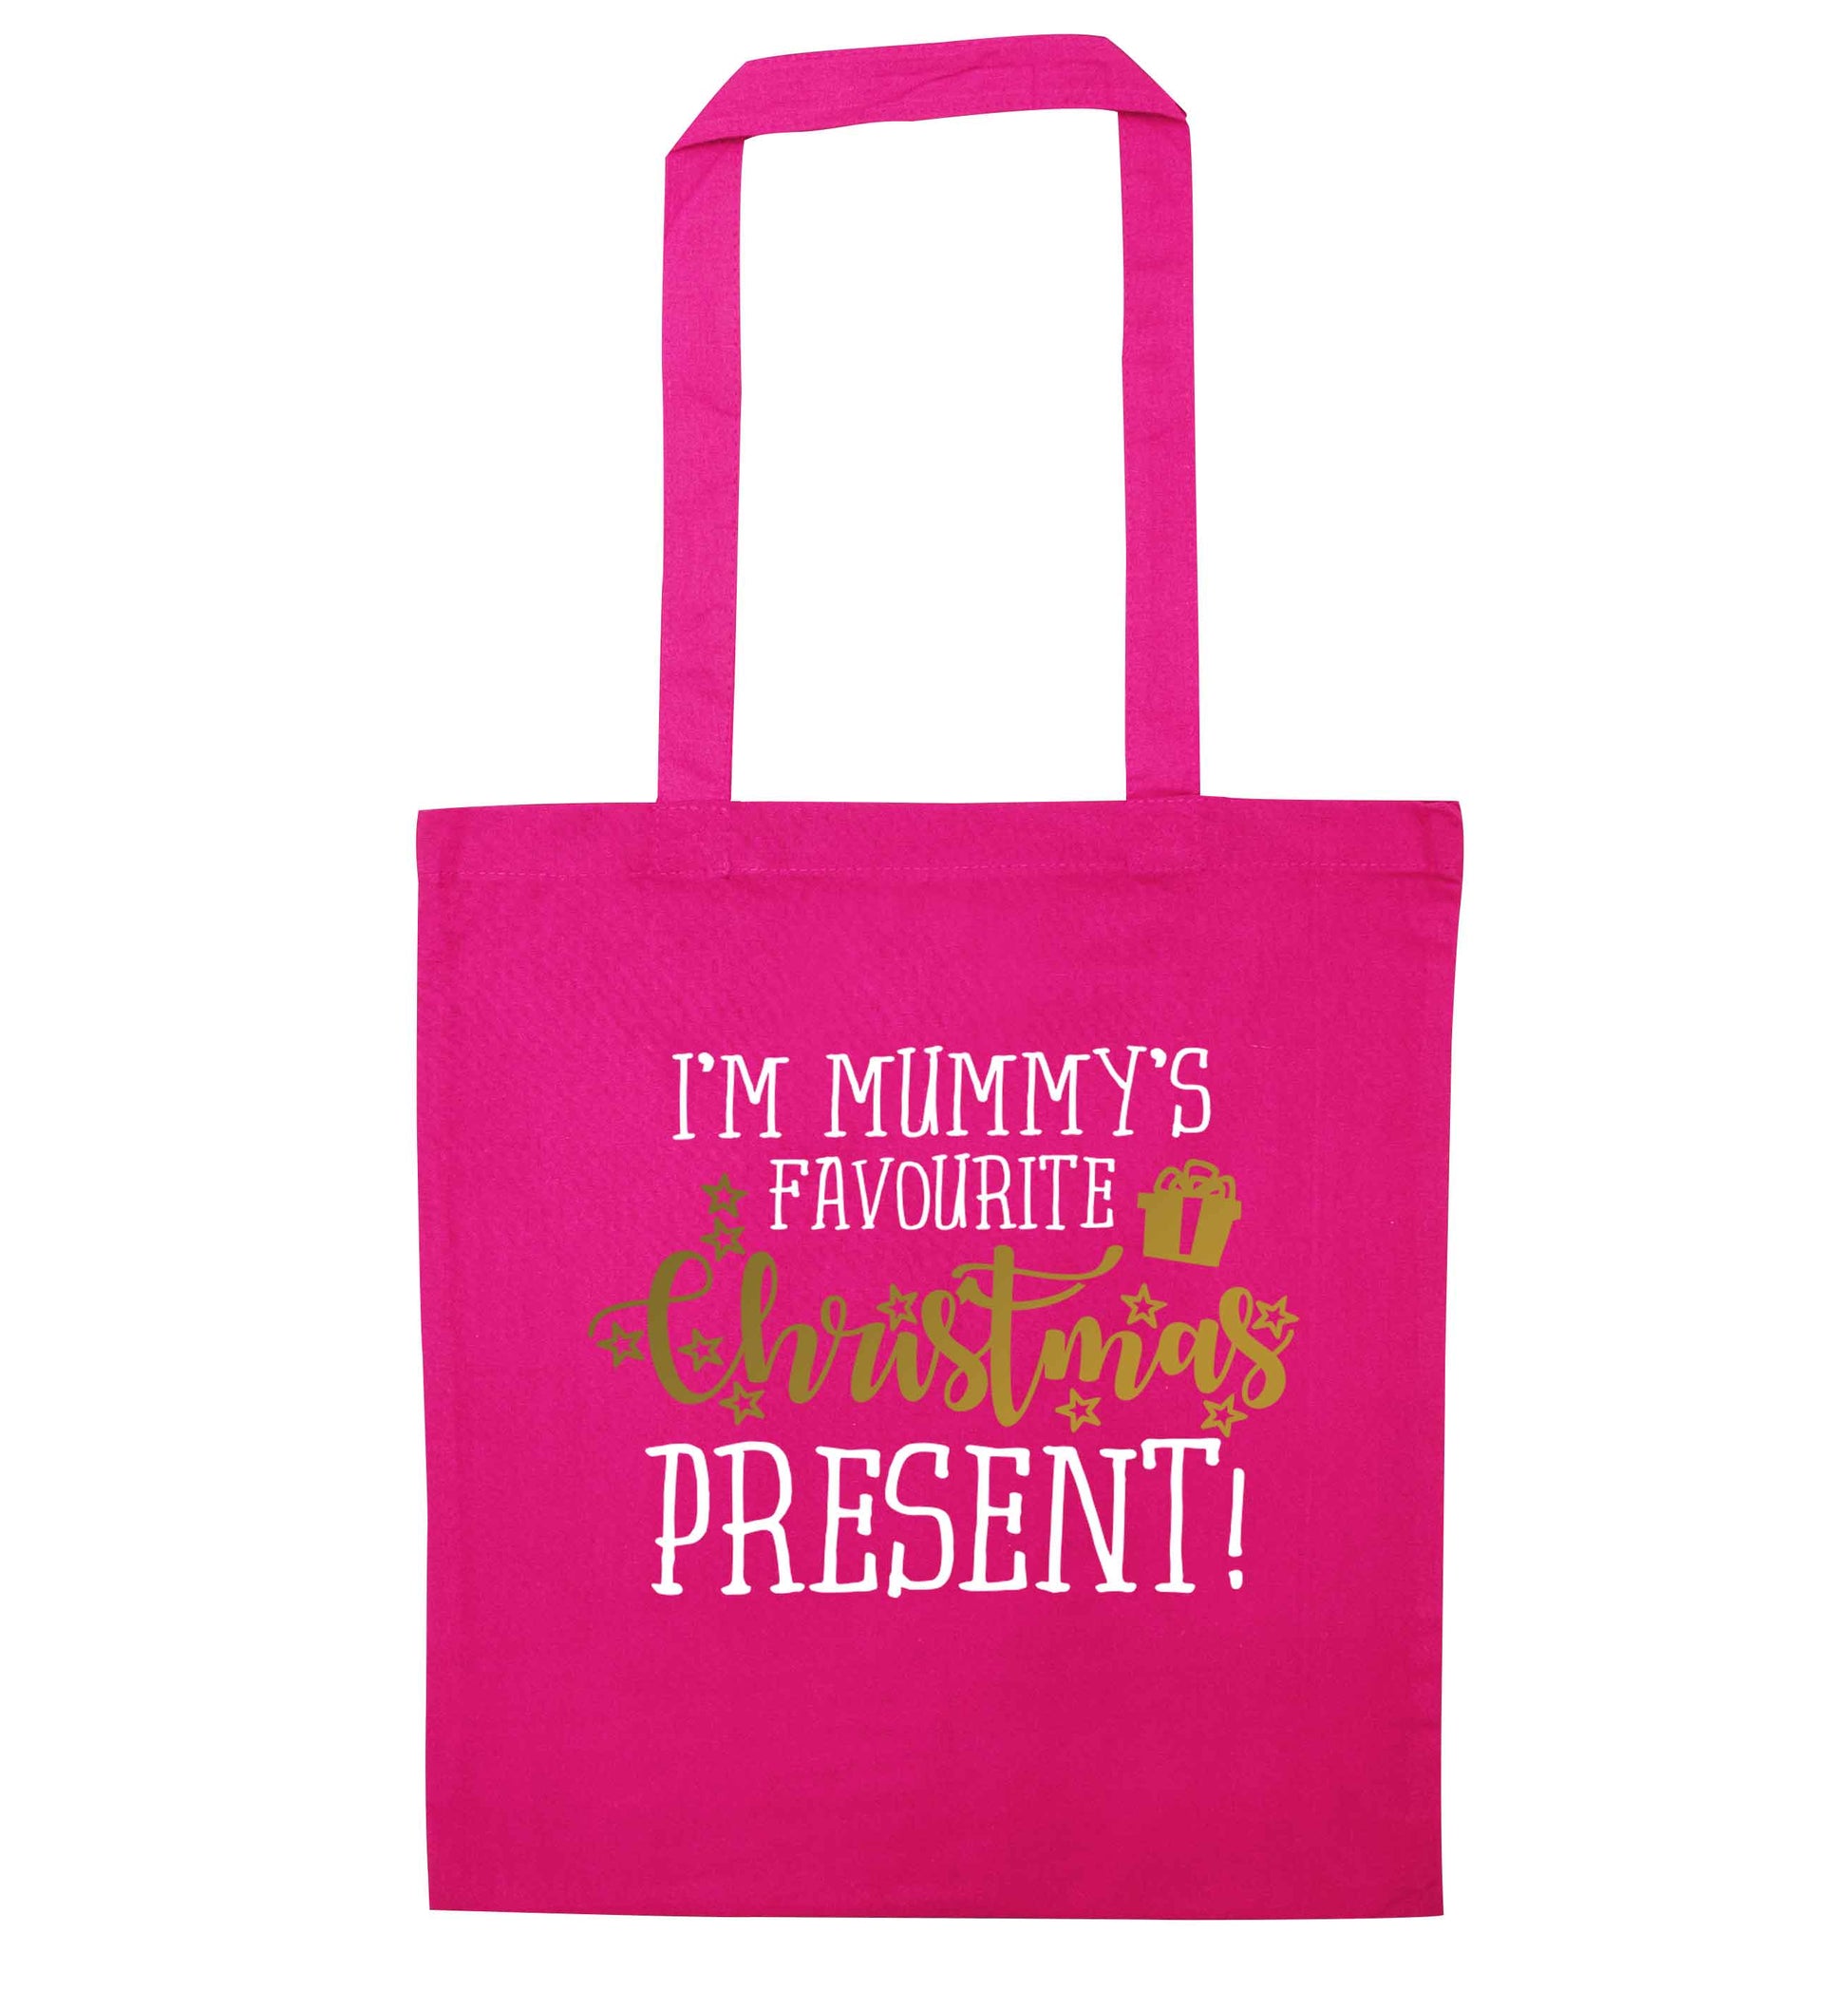 I'm Mummy's favourite Christmas present pink tote bag